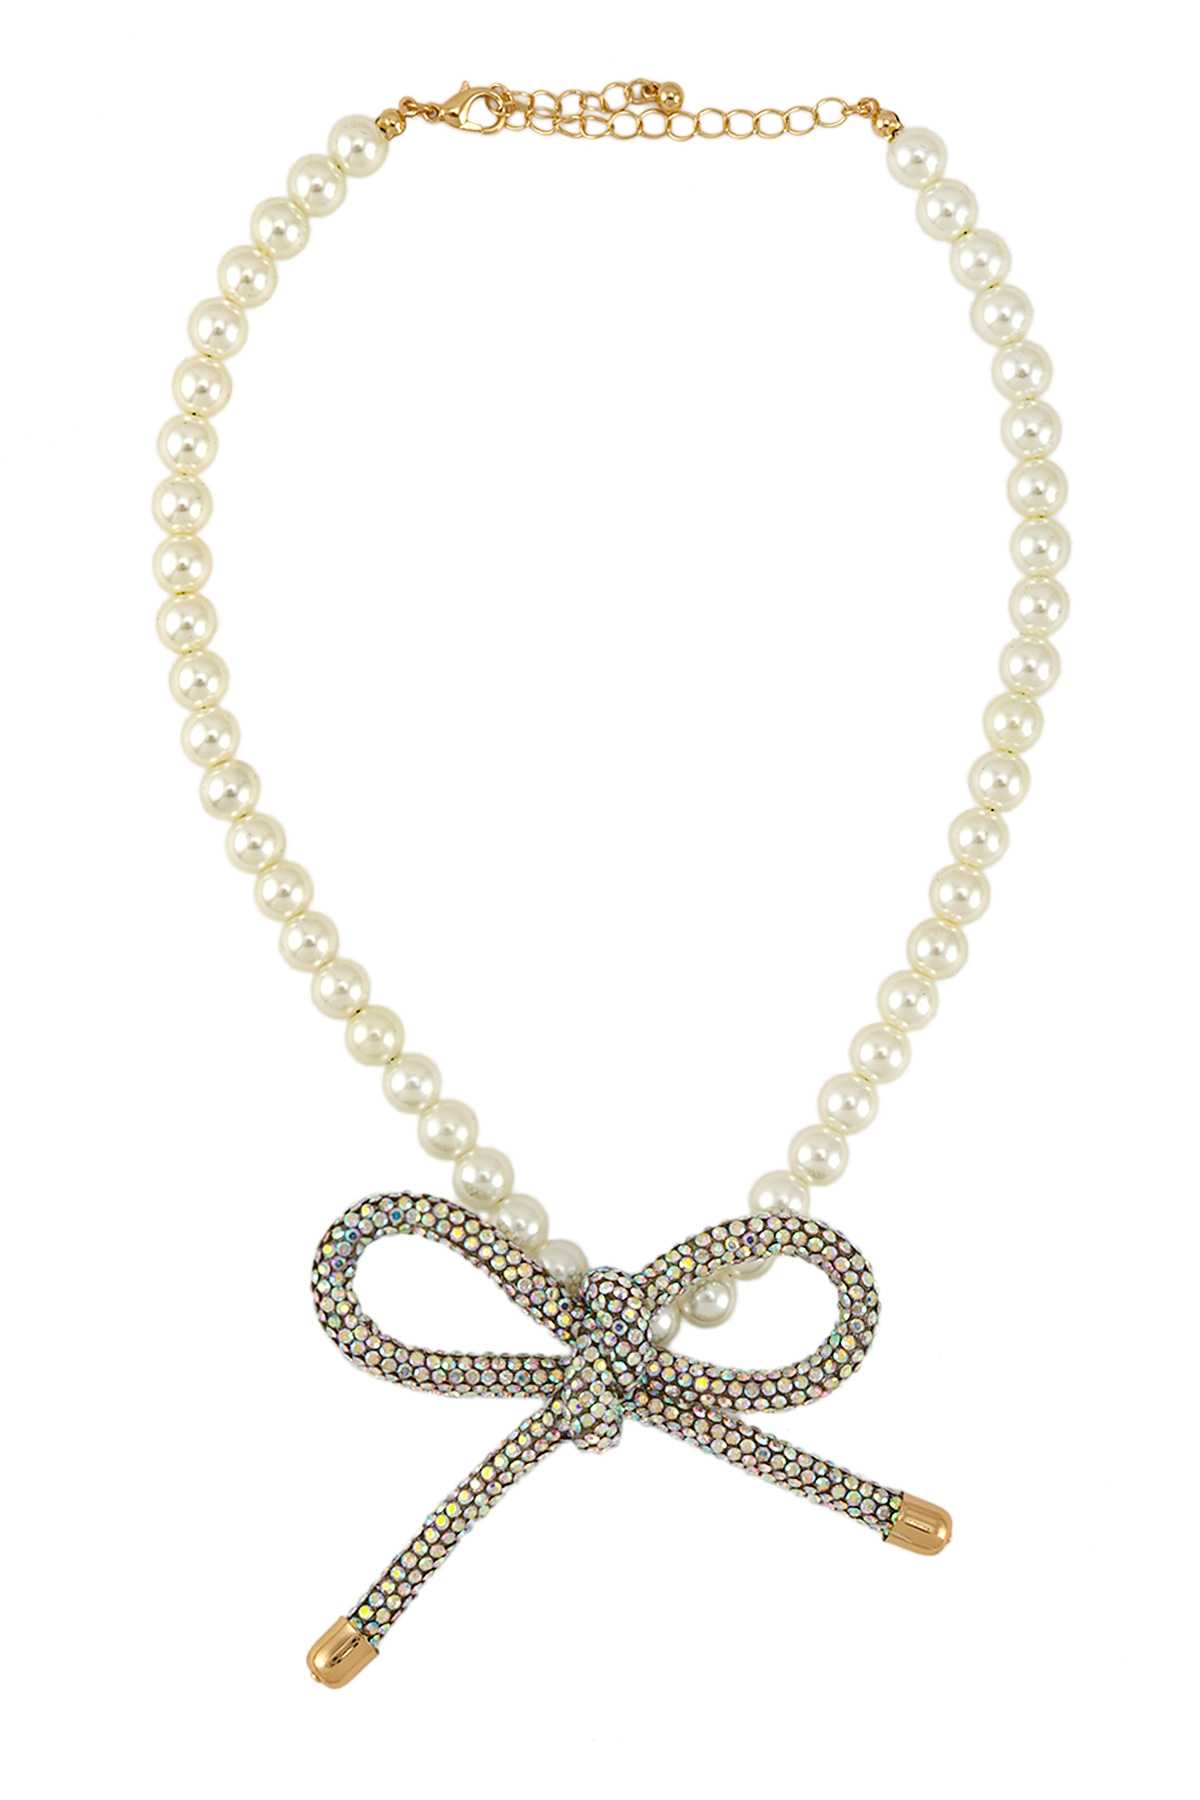 Rhinestone Ribbon and Pearl Necklace